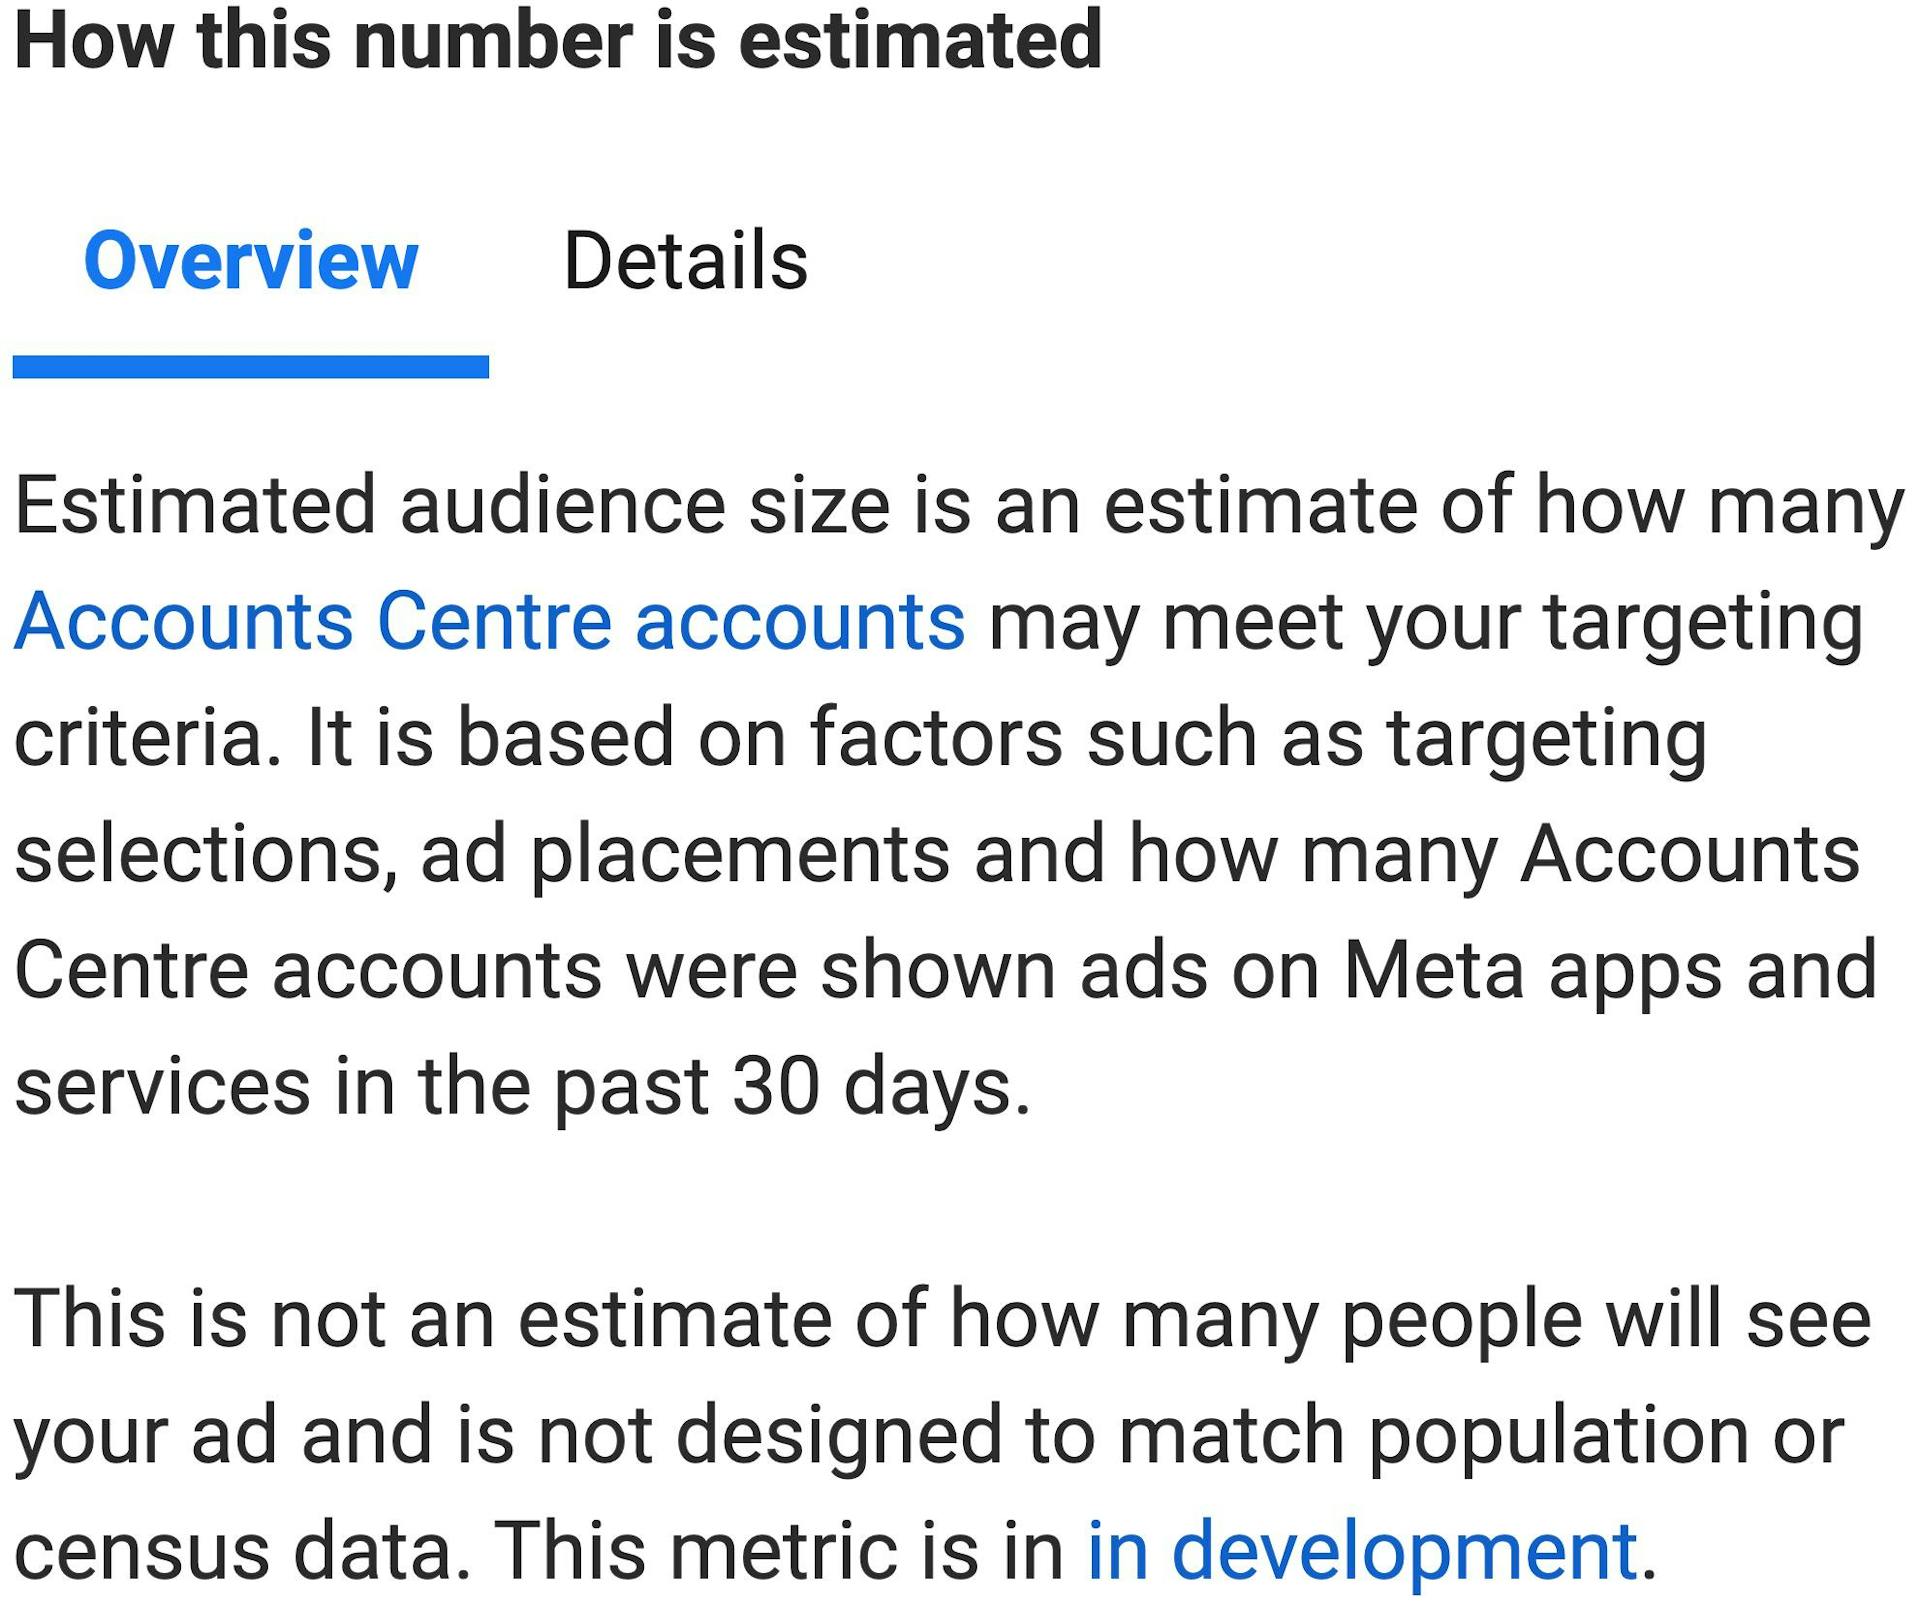 Text that reads: "How this number is estimated: Overview. Estimated audience size is an estimate of how many Accounts Centre accounts may meet your targeting criteria. It is based on factors such as targeting selections, ad placements and how many Accounts Centre accounts were shown as on Meta apps and services in the past 30 days. This is not an estimate of how many people will see your ad and is not designed to match population or census data. This metric is in development."